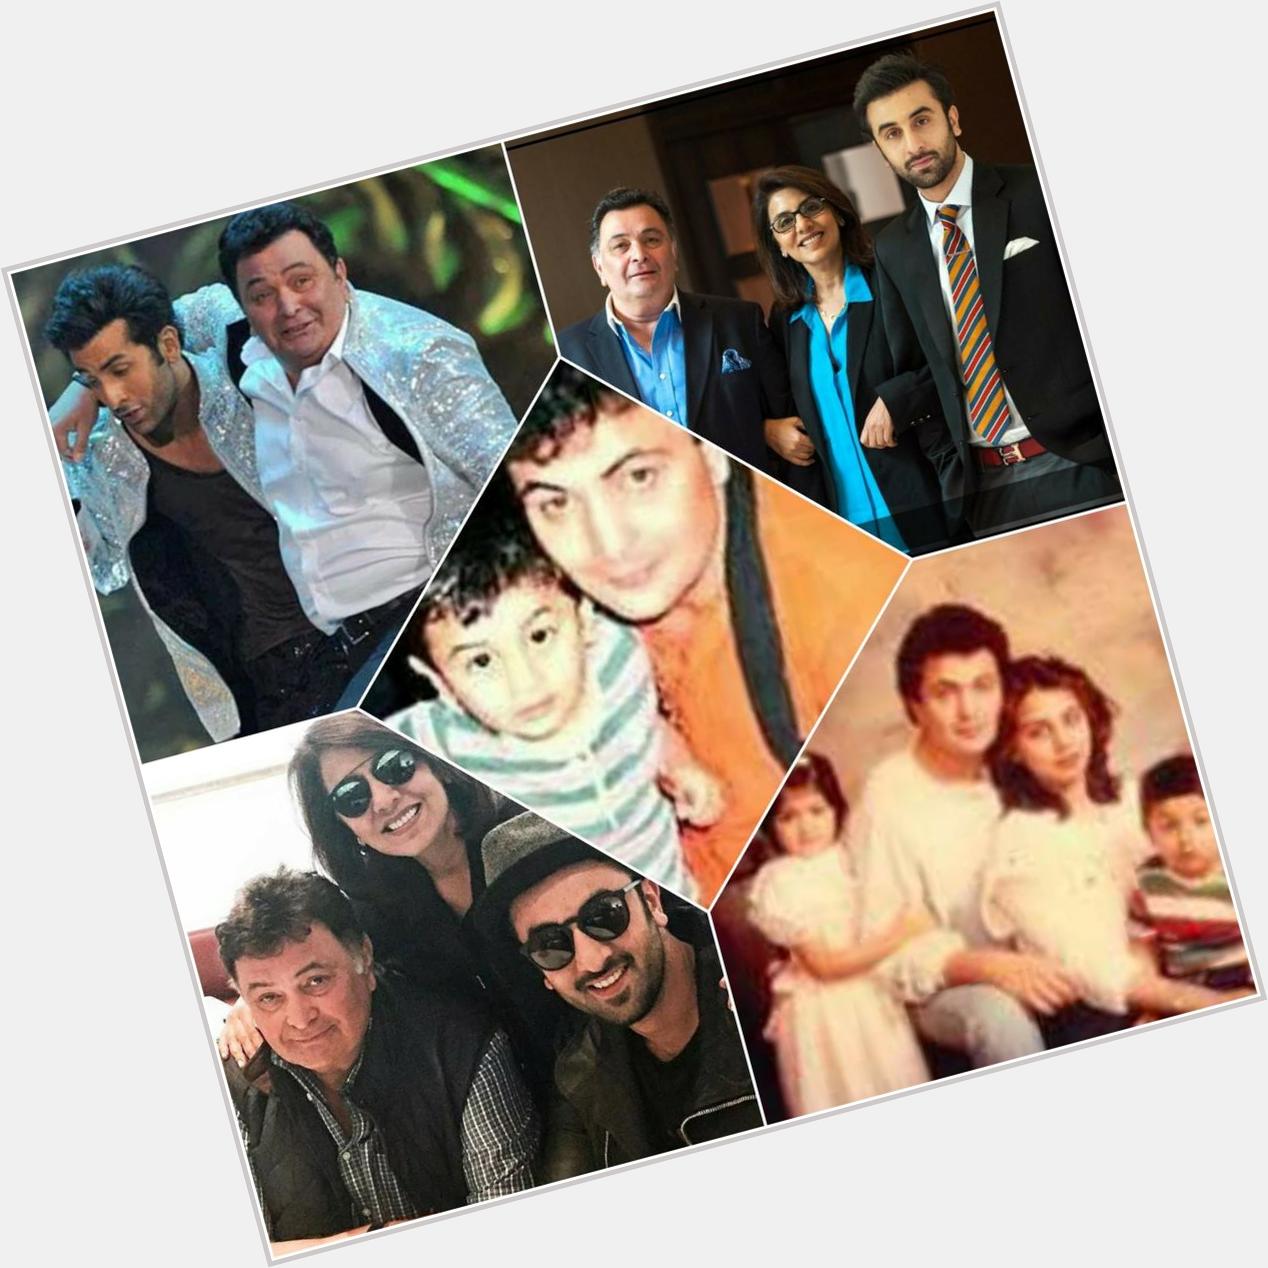 Wish you a very Happy Birthday Sir! lot of love from Ranbir Kapoor Universe Team! We adore you :) 